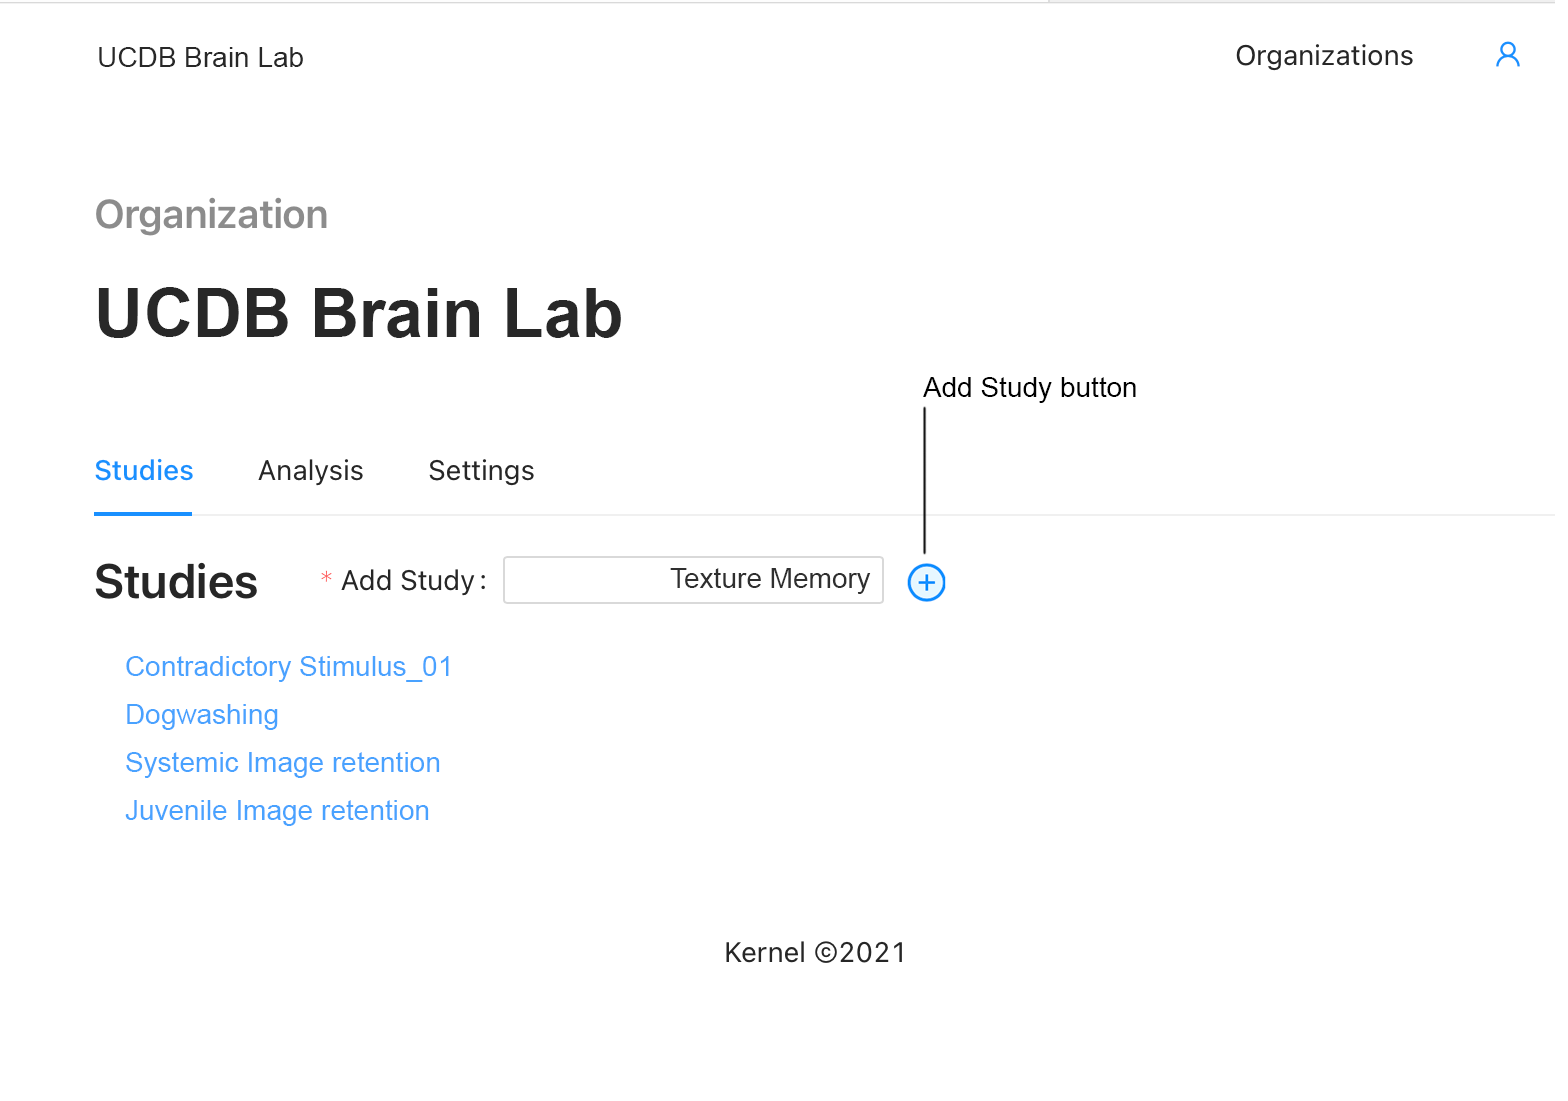 Image: Studies tab of the organization page. Callout to Add Study button.